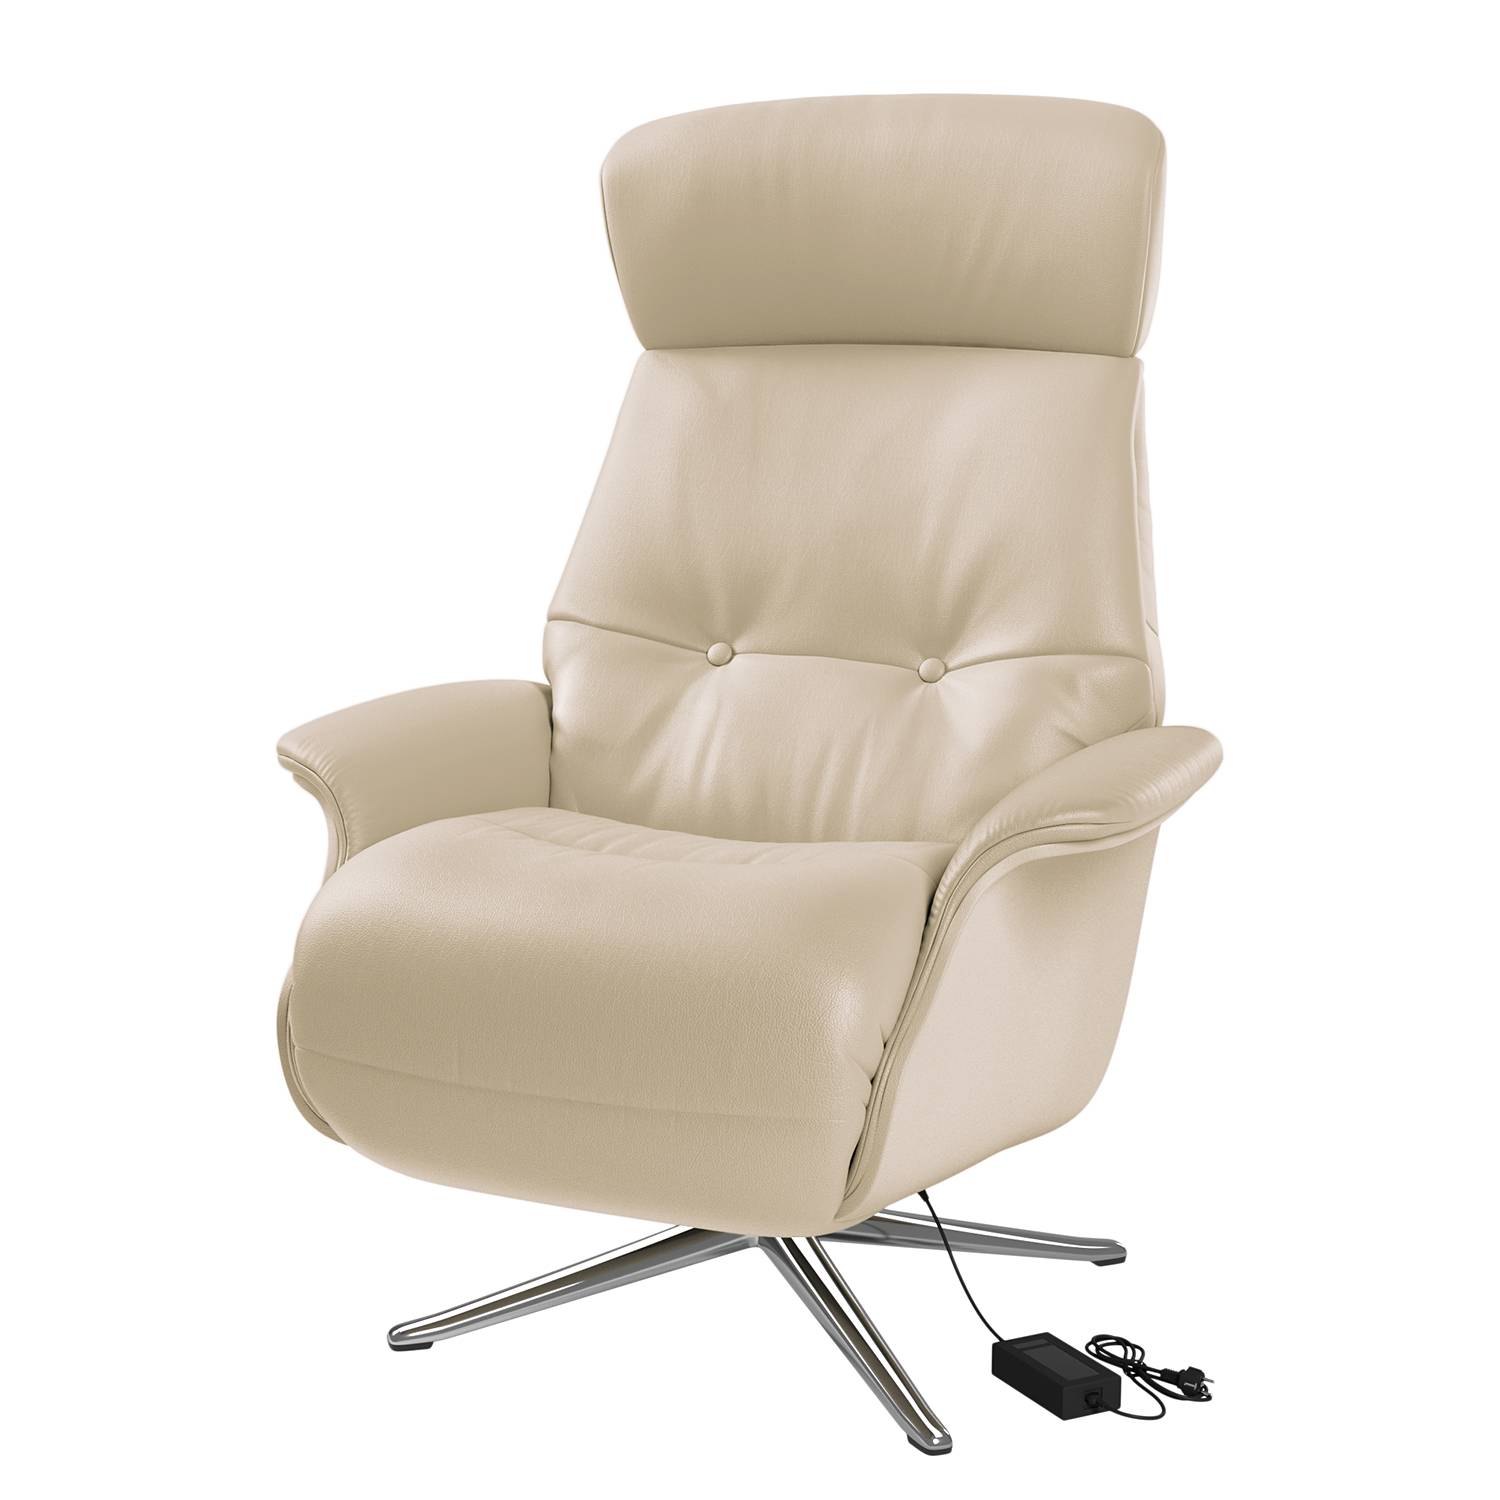 Image of Fauteuil relax Anderson VI 000000001000131471